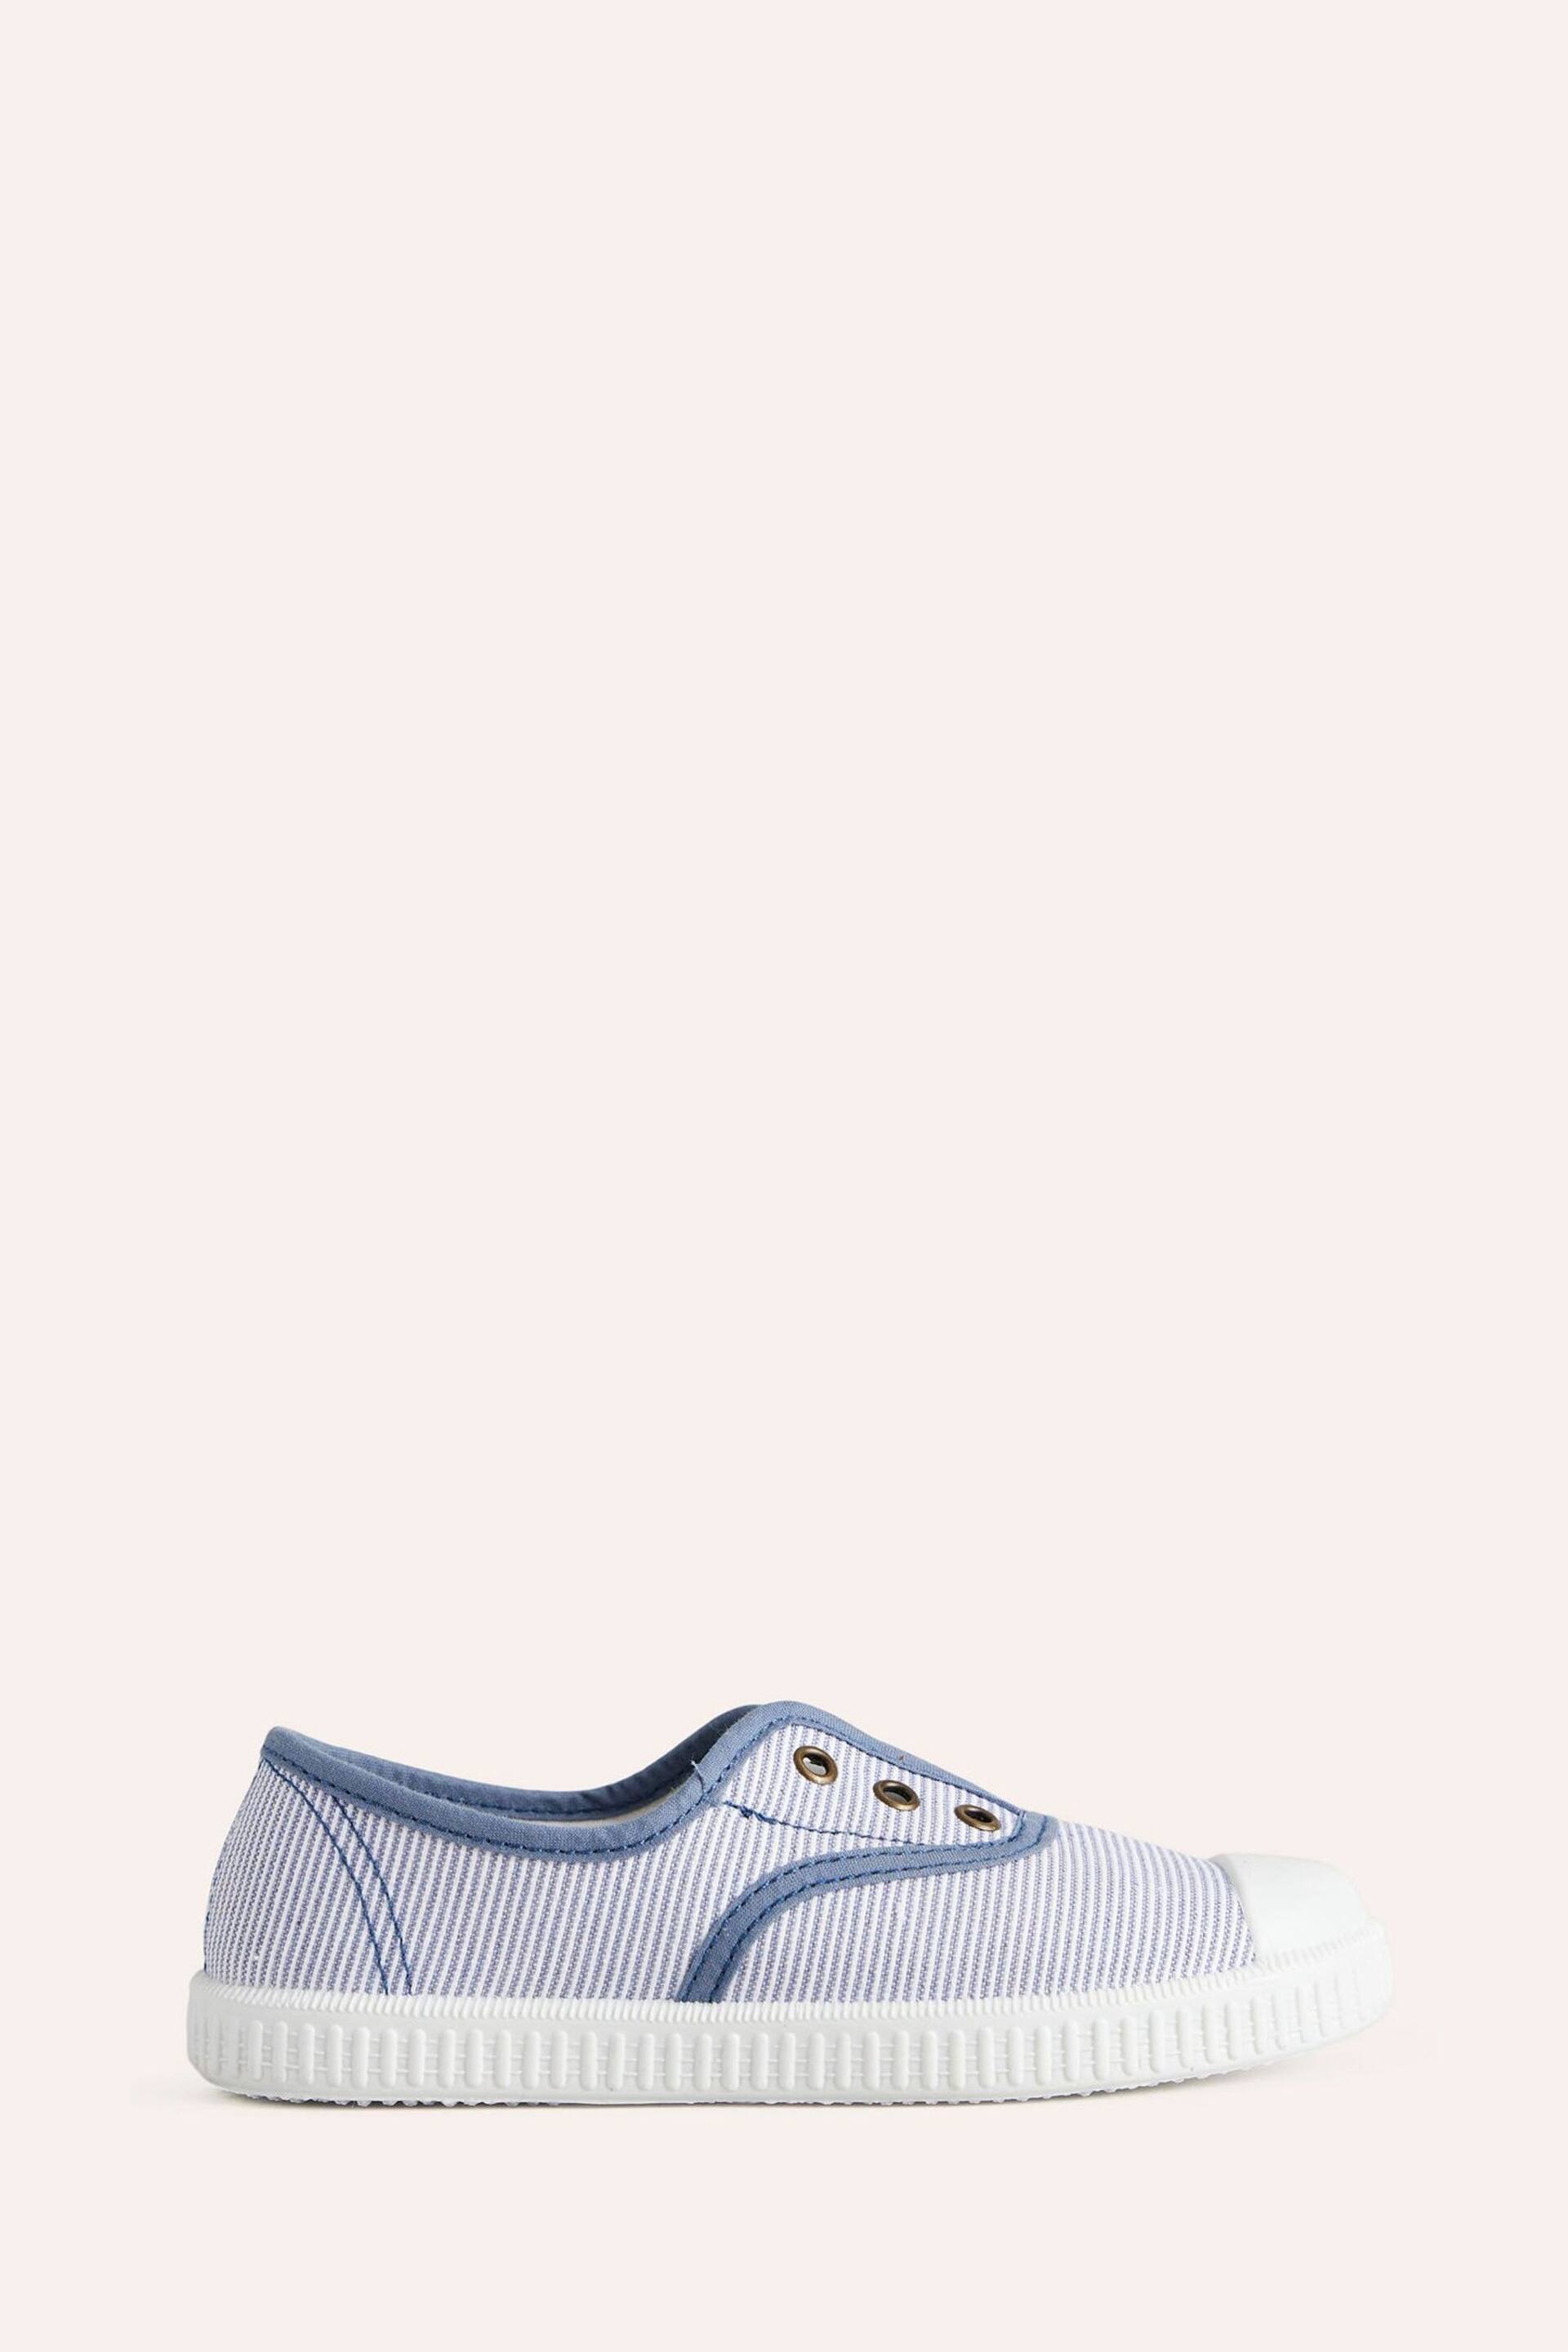 Boden Blue Stripe Laceless Canvas Pull-ons - Image 1 of 3